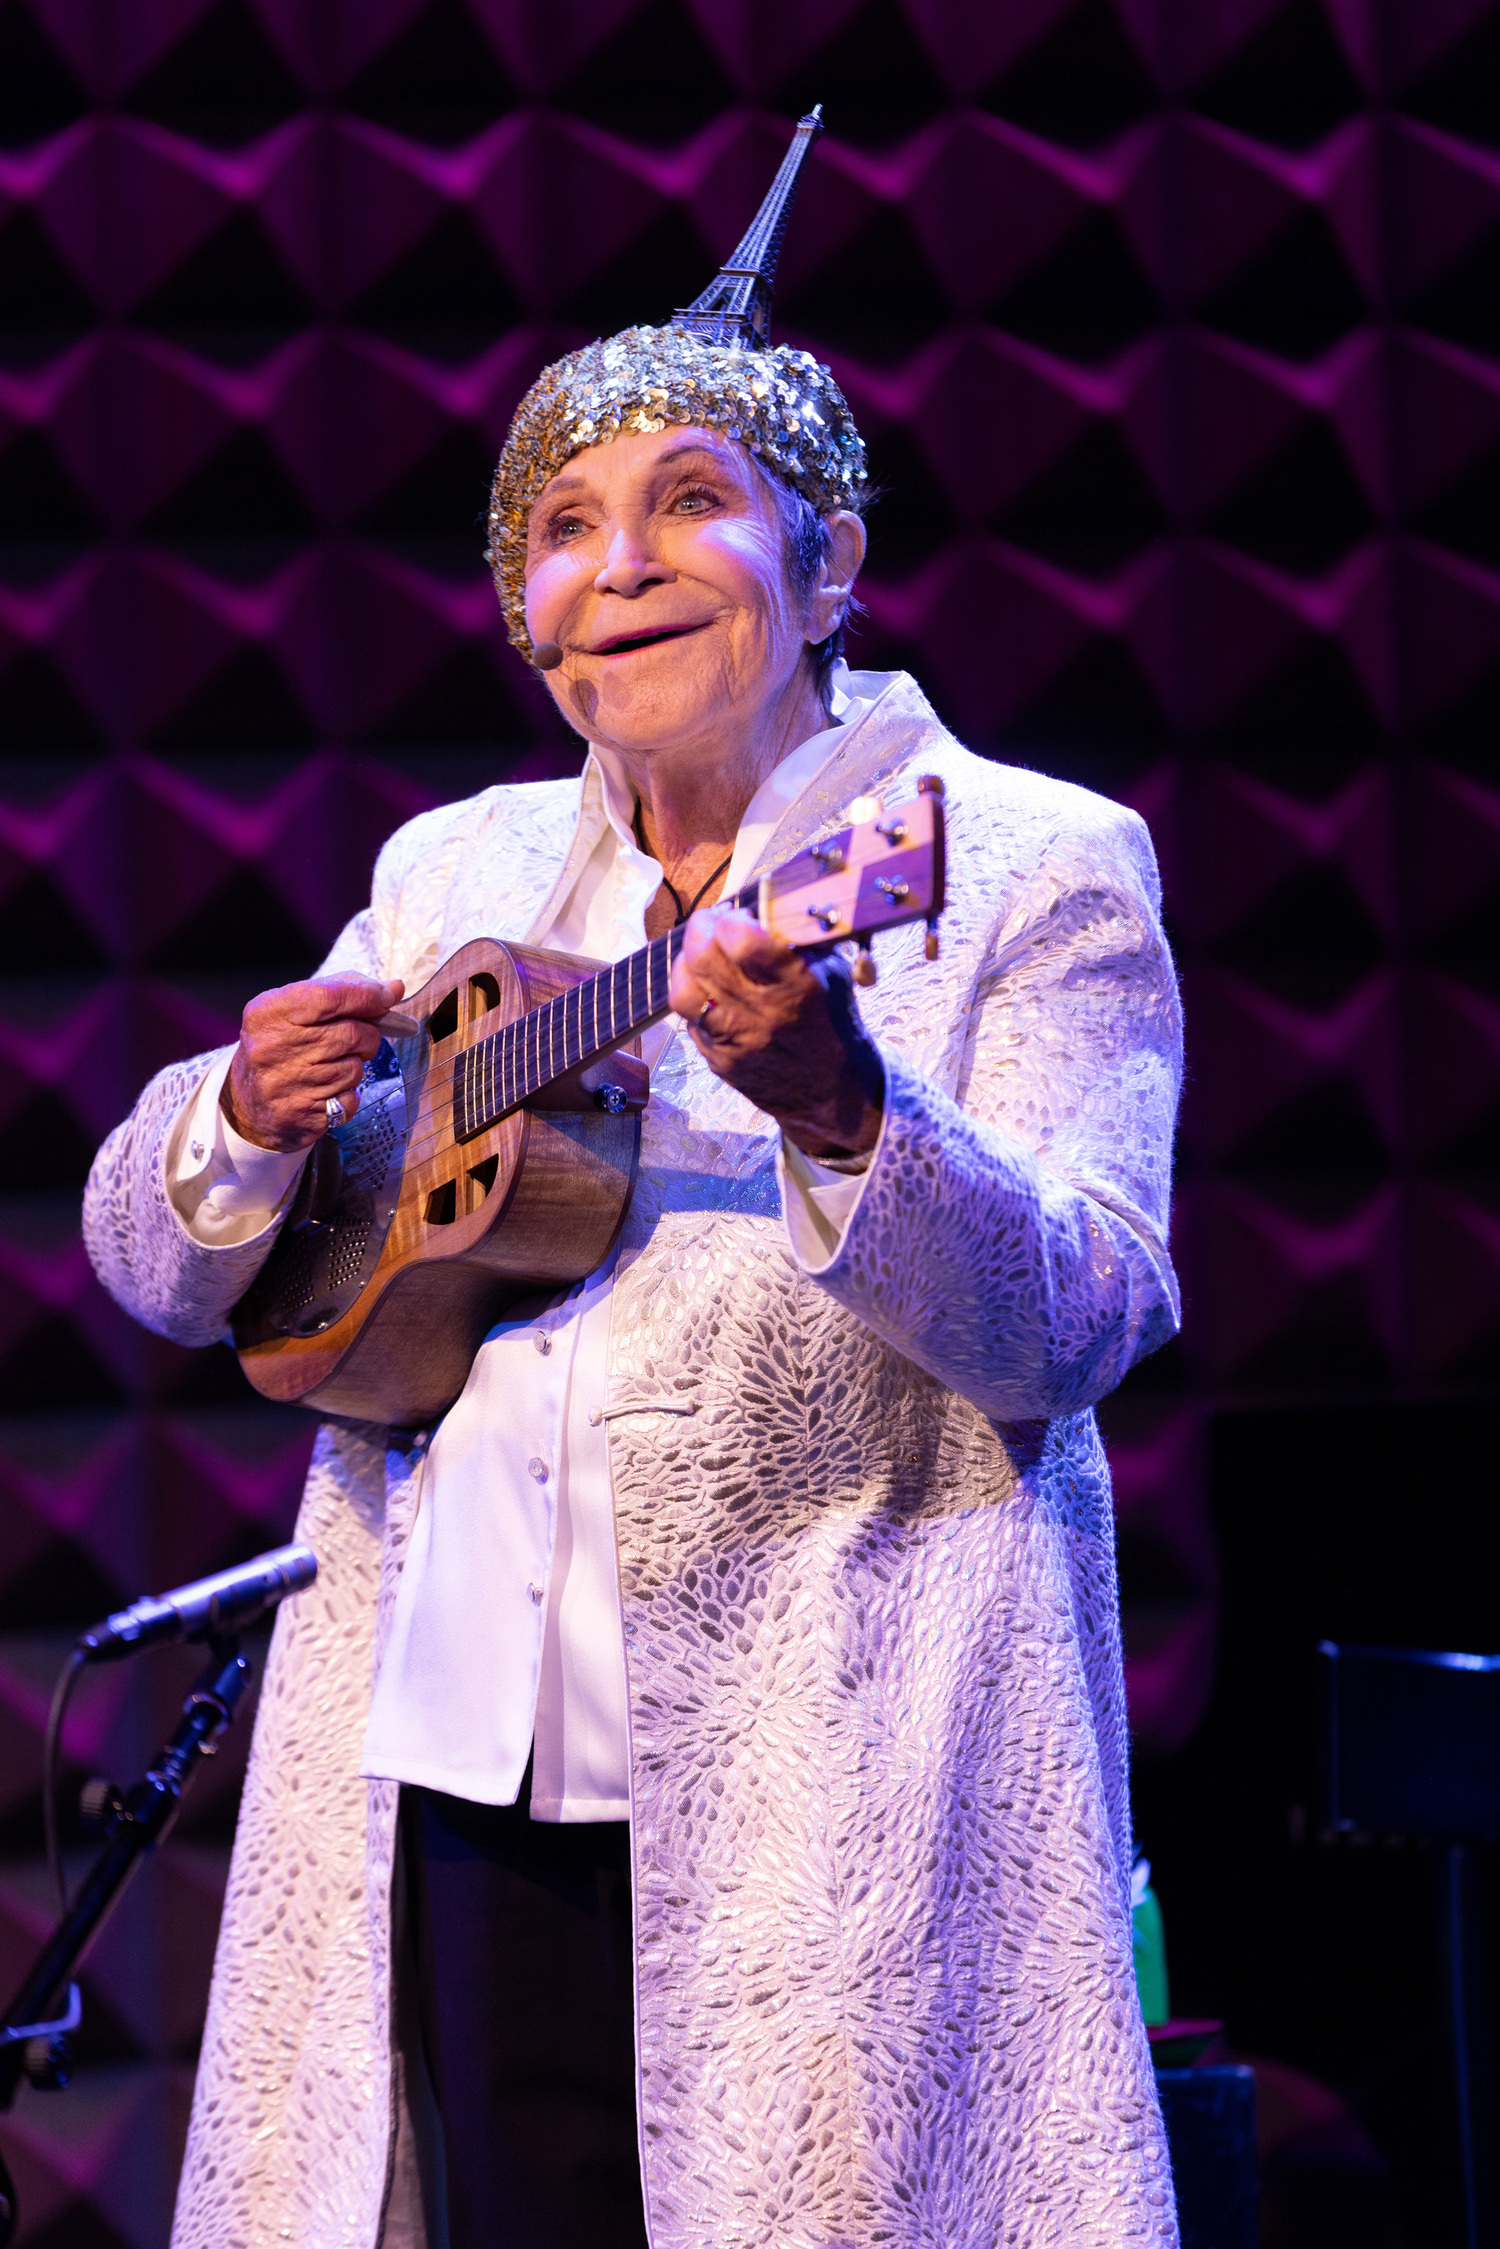 Southampton Village resident D'yan Forest, 89, is in the Guinness Book of World Records the world's oldest living comedian. She performed at the Southampton Cultural Center recently, and regularly performs stand-up at the Gotham Comedy Club in New York City. DAVID ANDRAKO